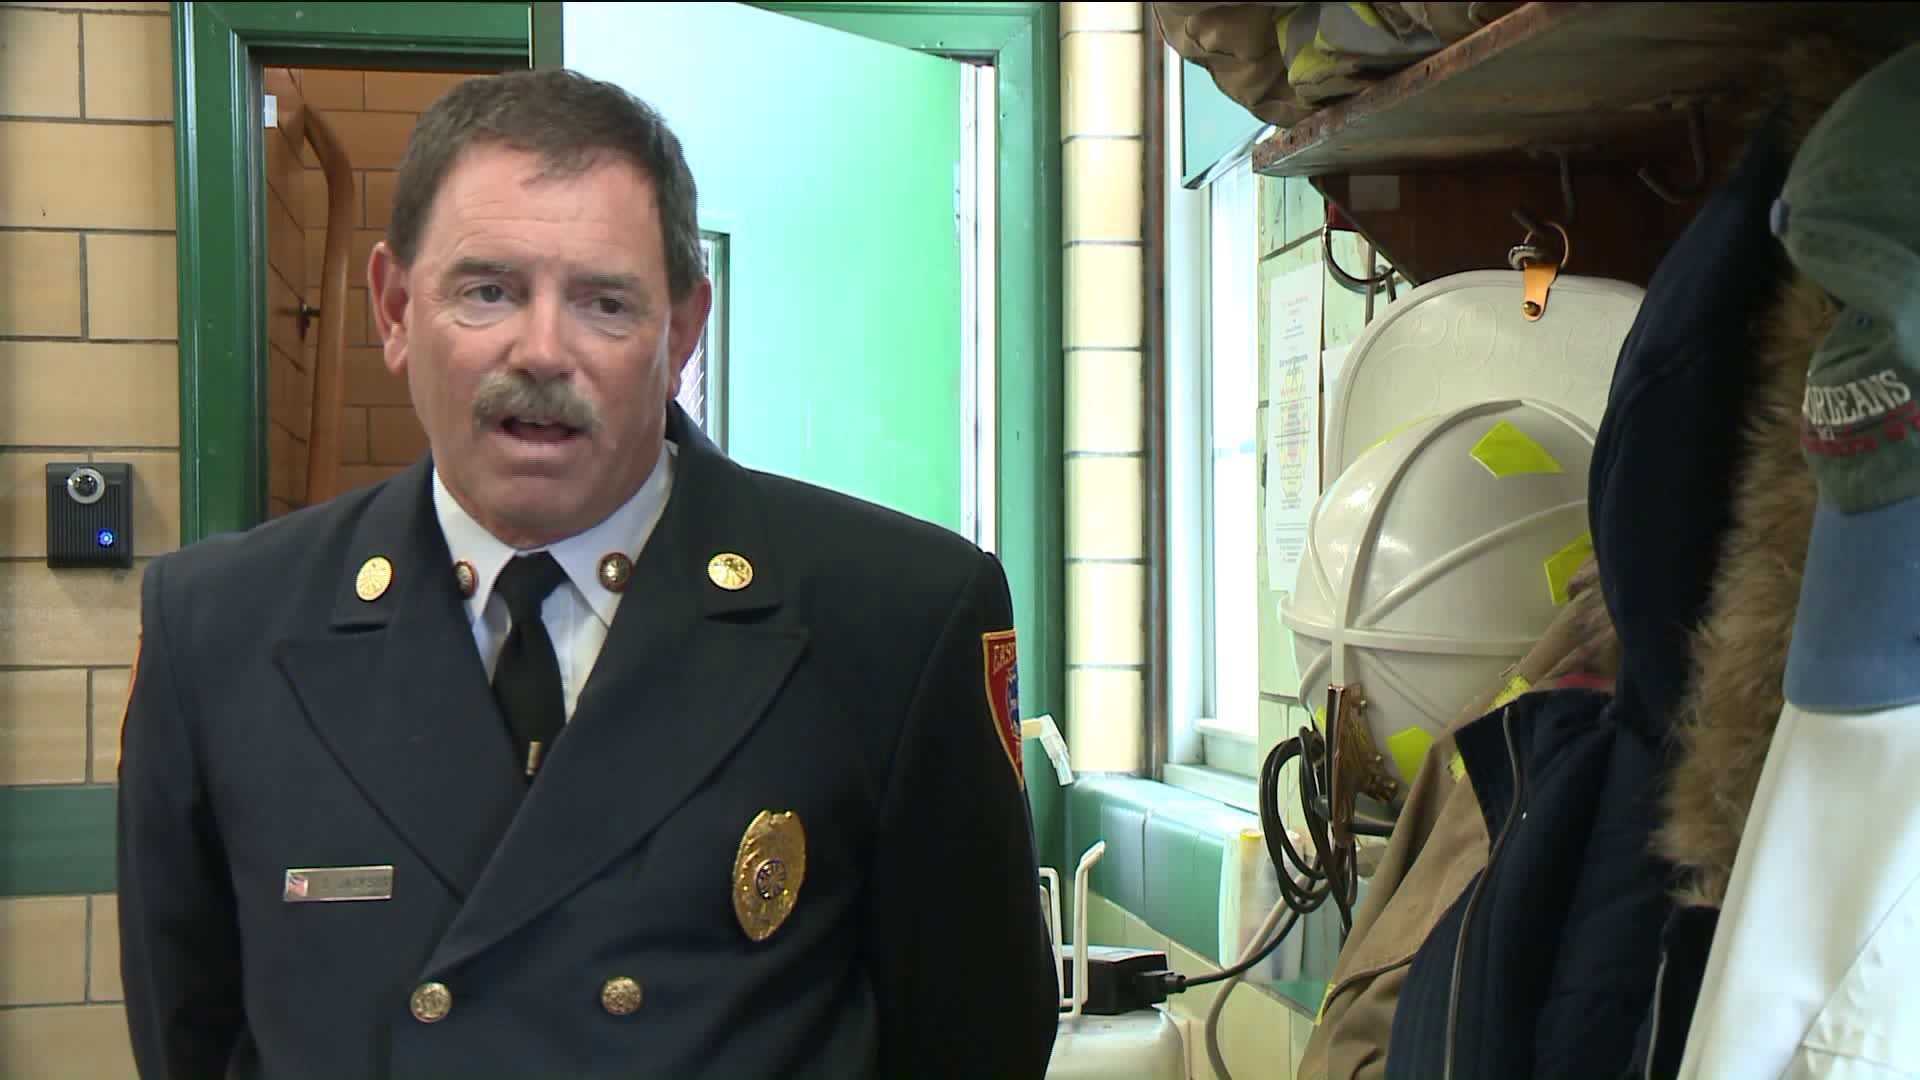 East haven fire chief retiring